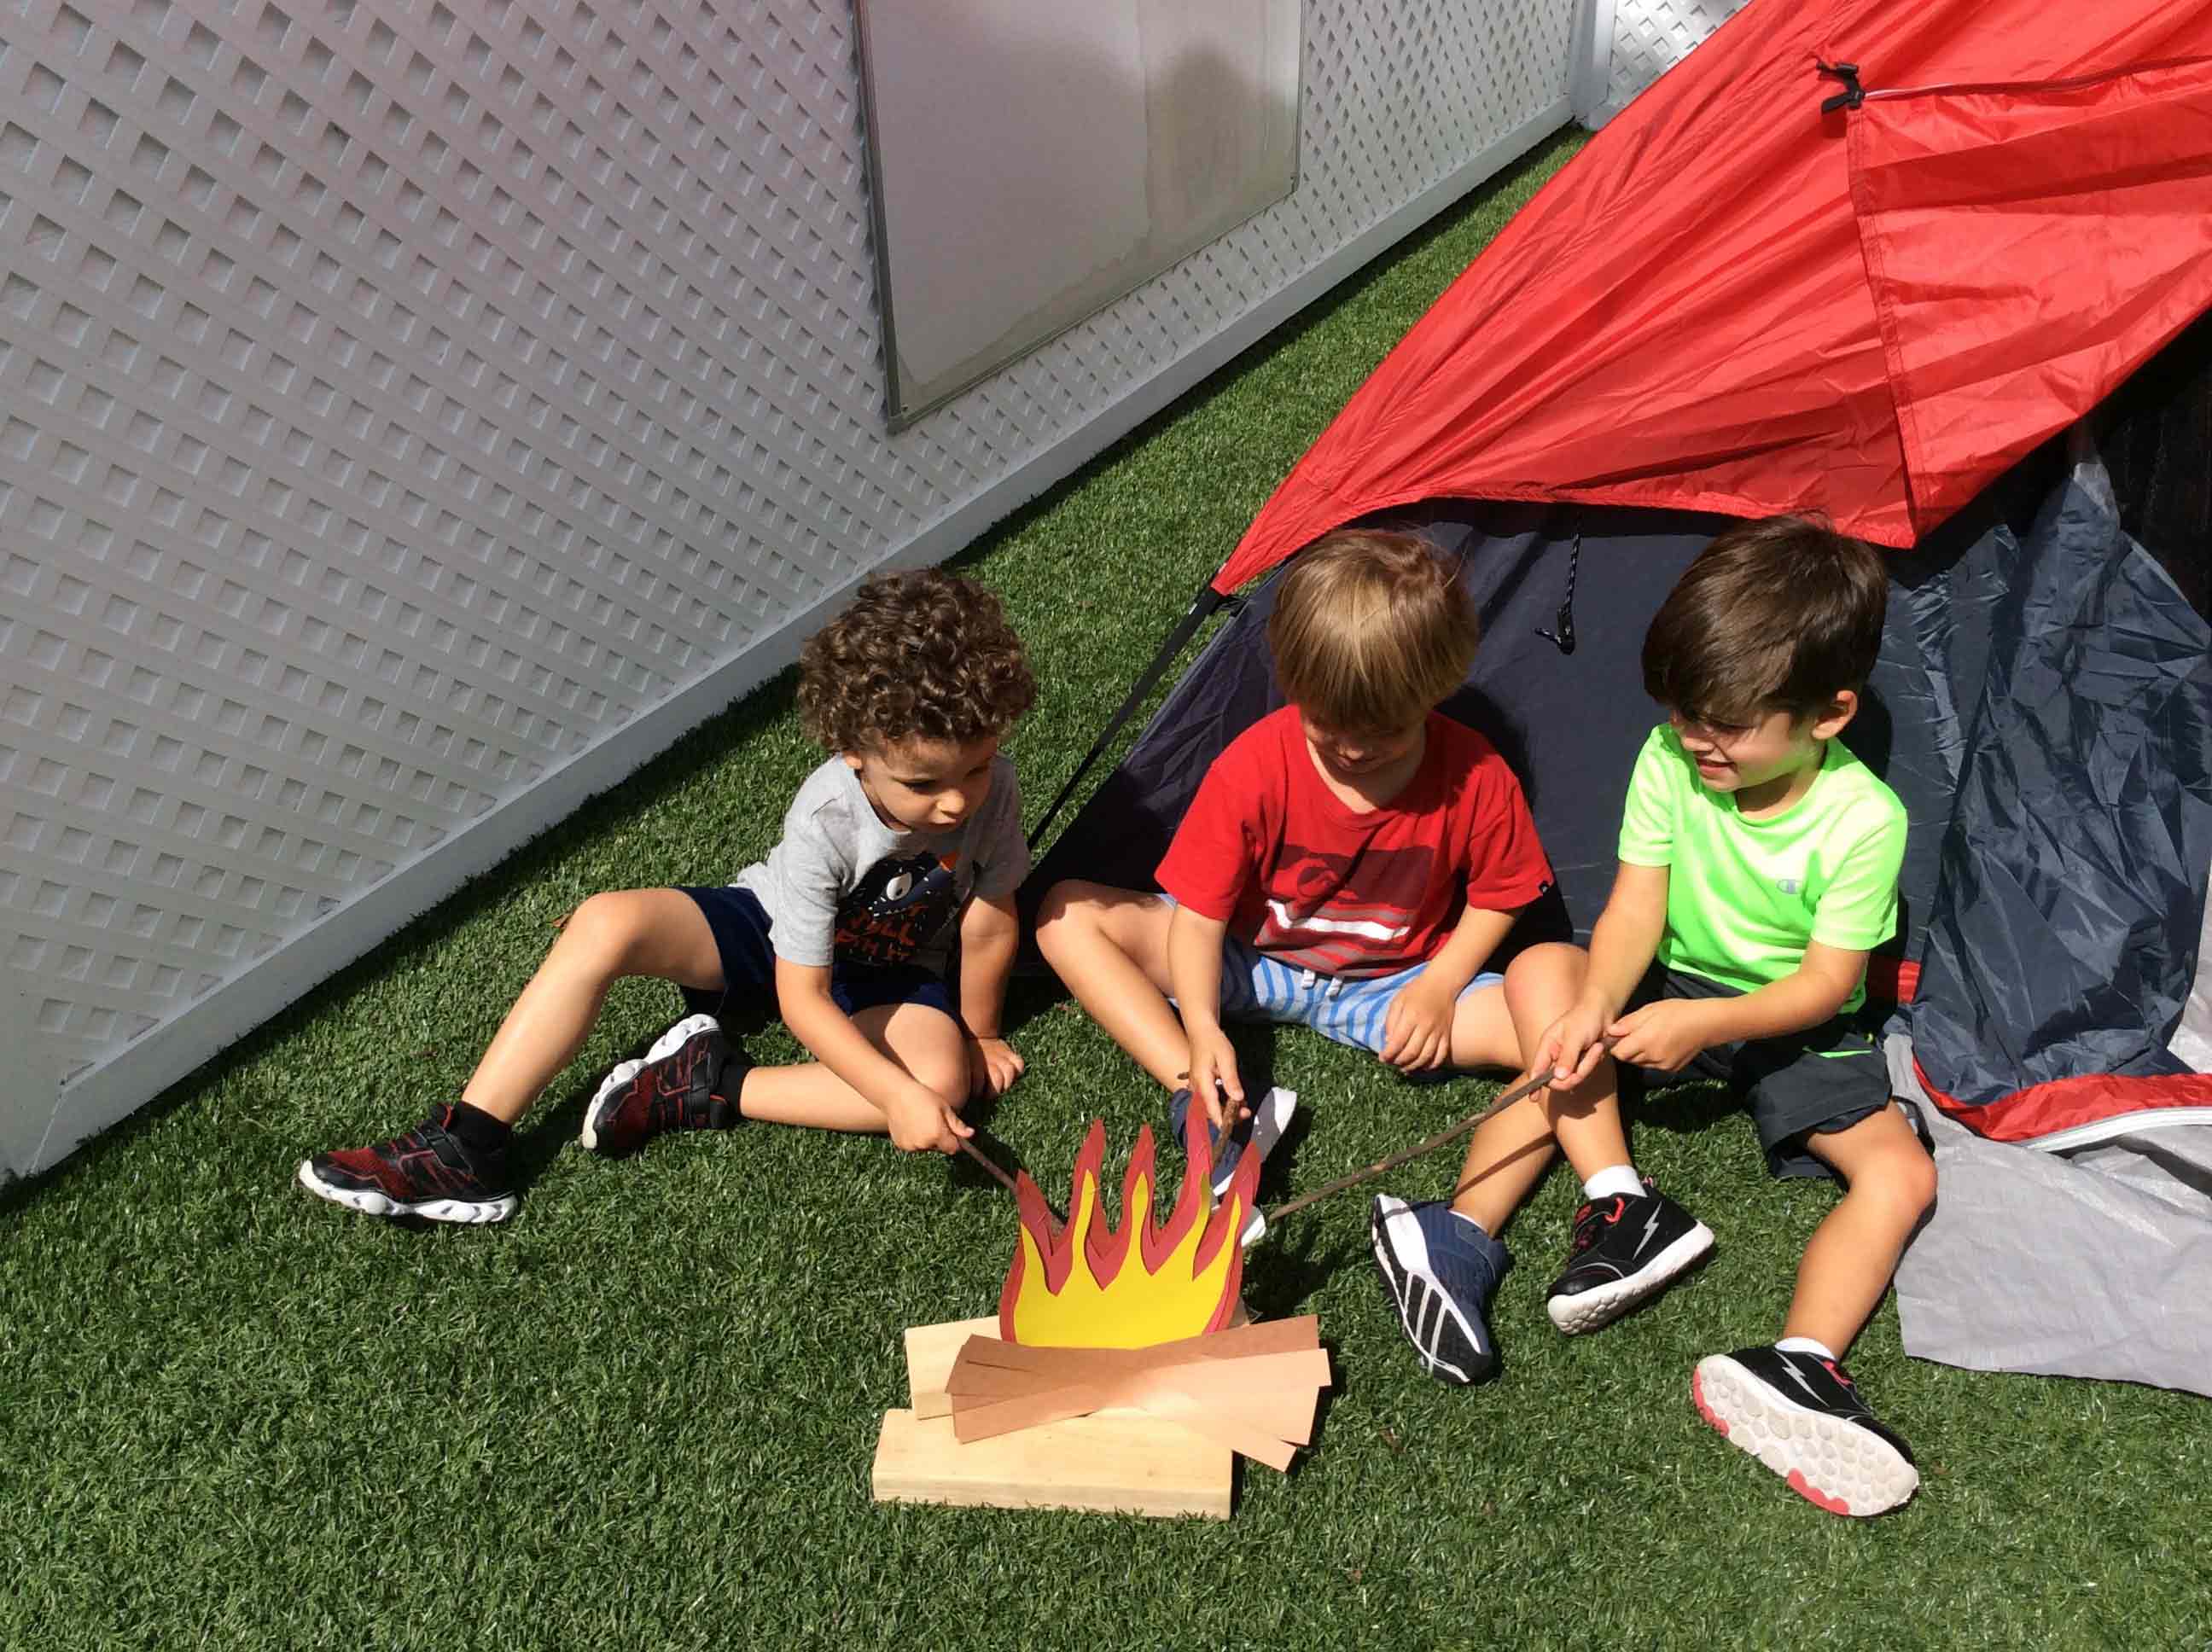 3 kids sitting outside a tent roasting marshmallows on a pretend fire made of paper